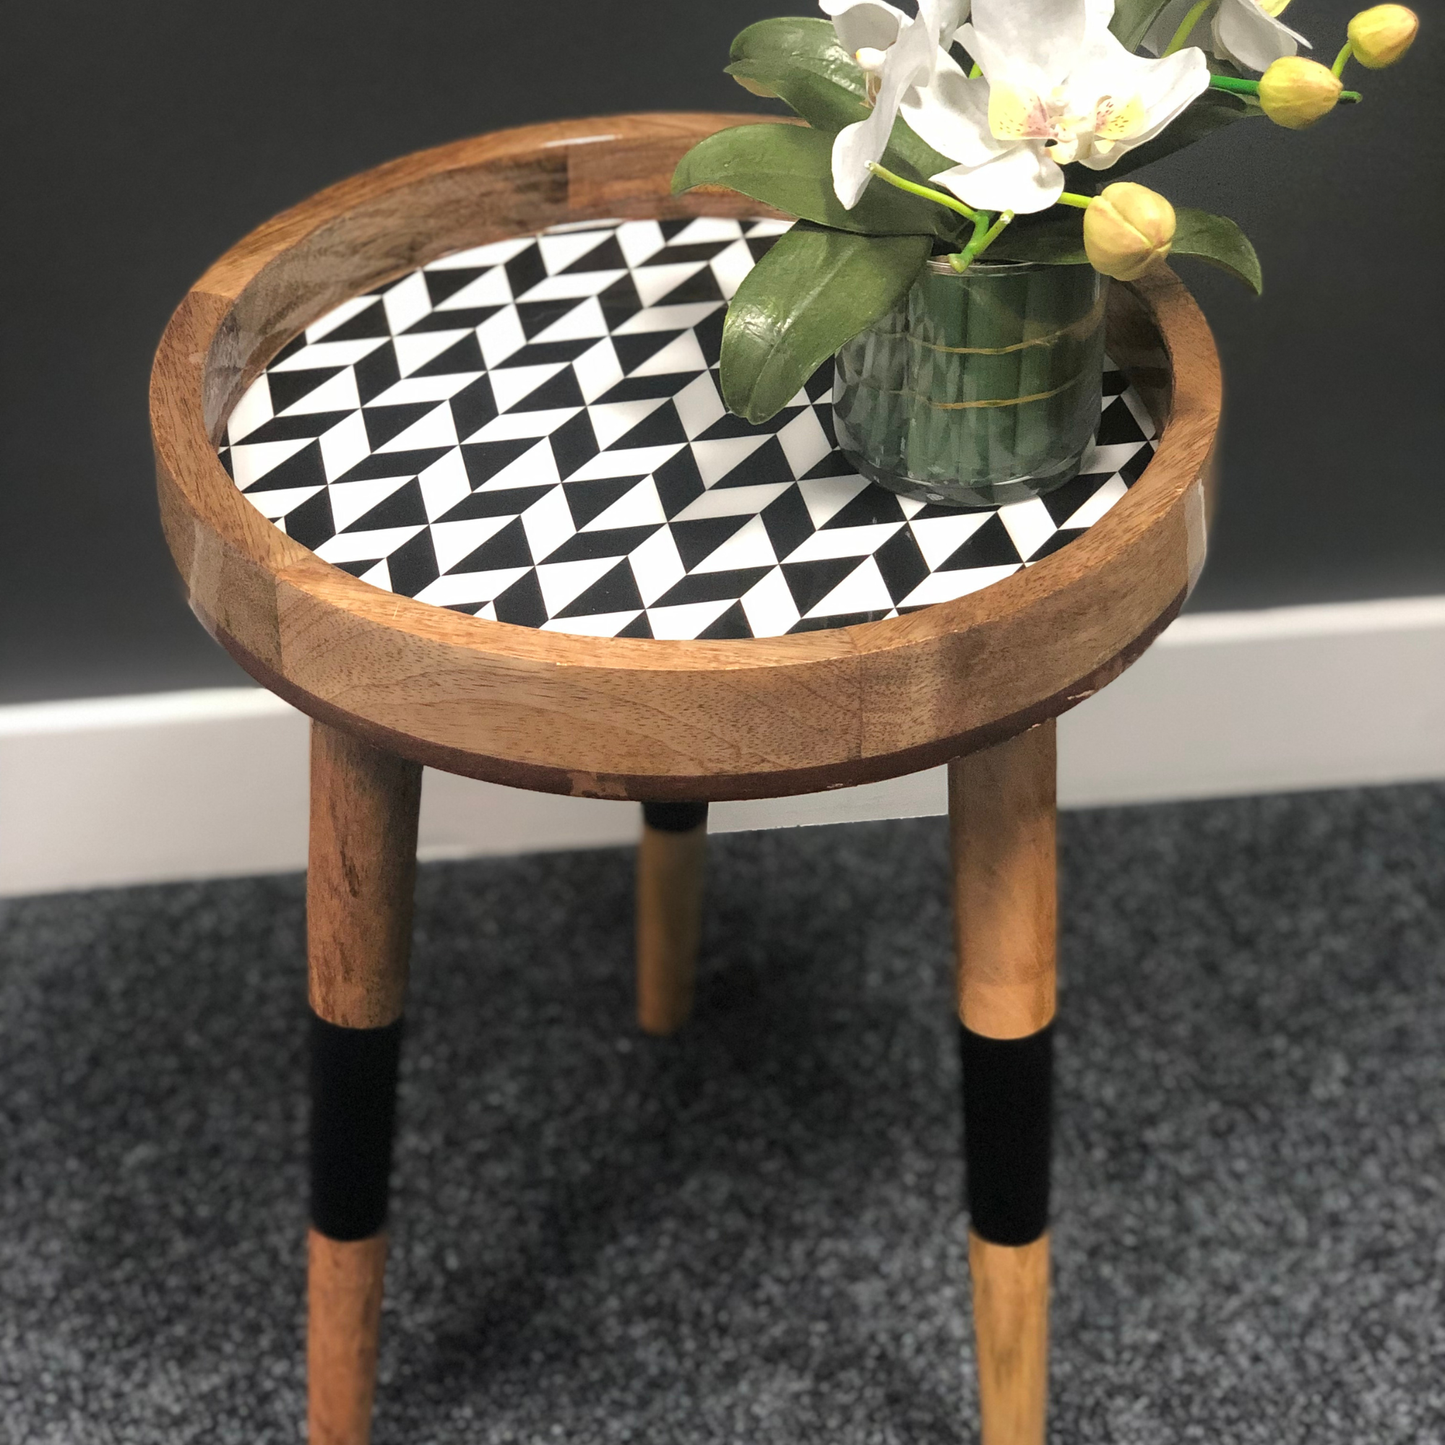 Handmade Side Table Removable Legs Monochrome Tray Table